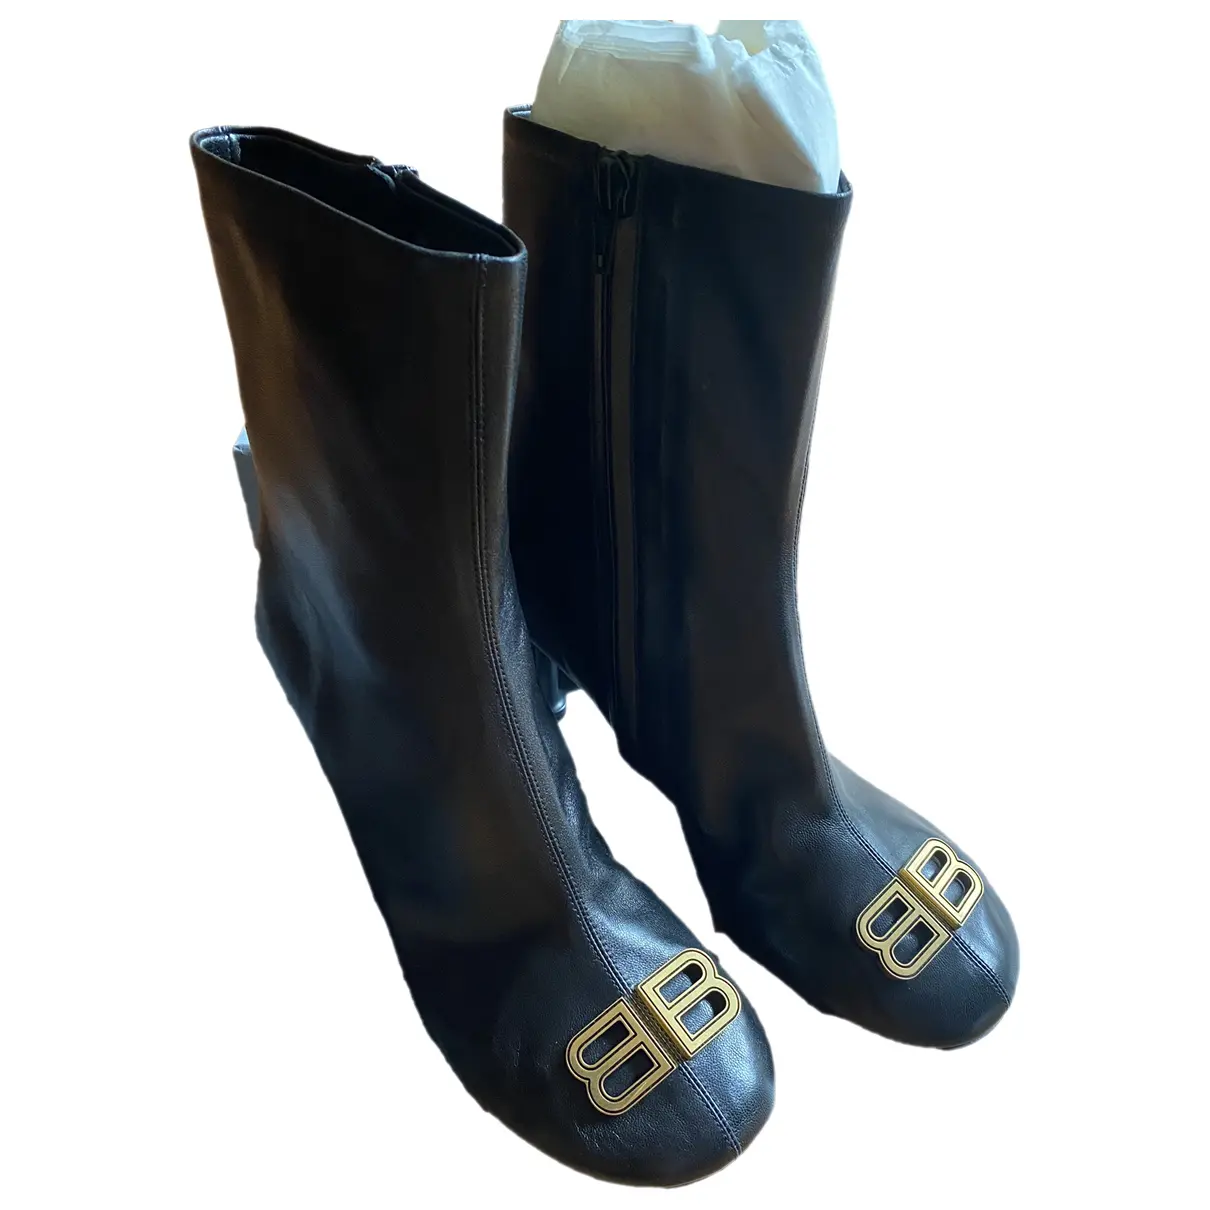 BB leather buckled boots